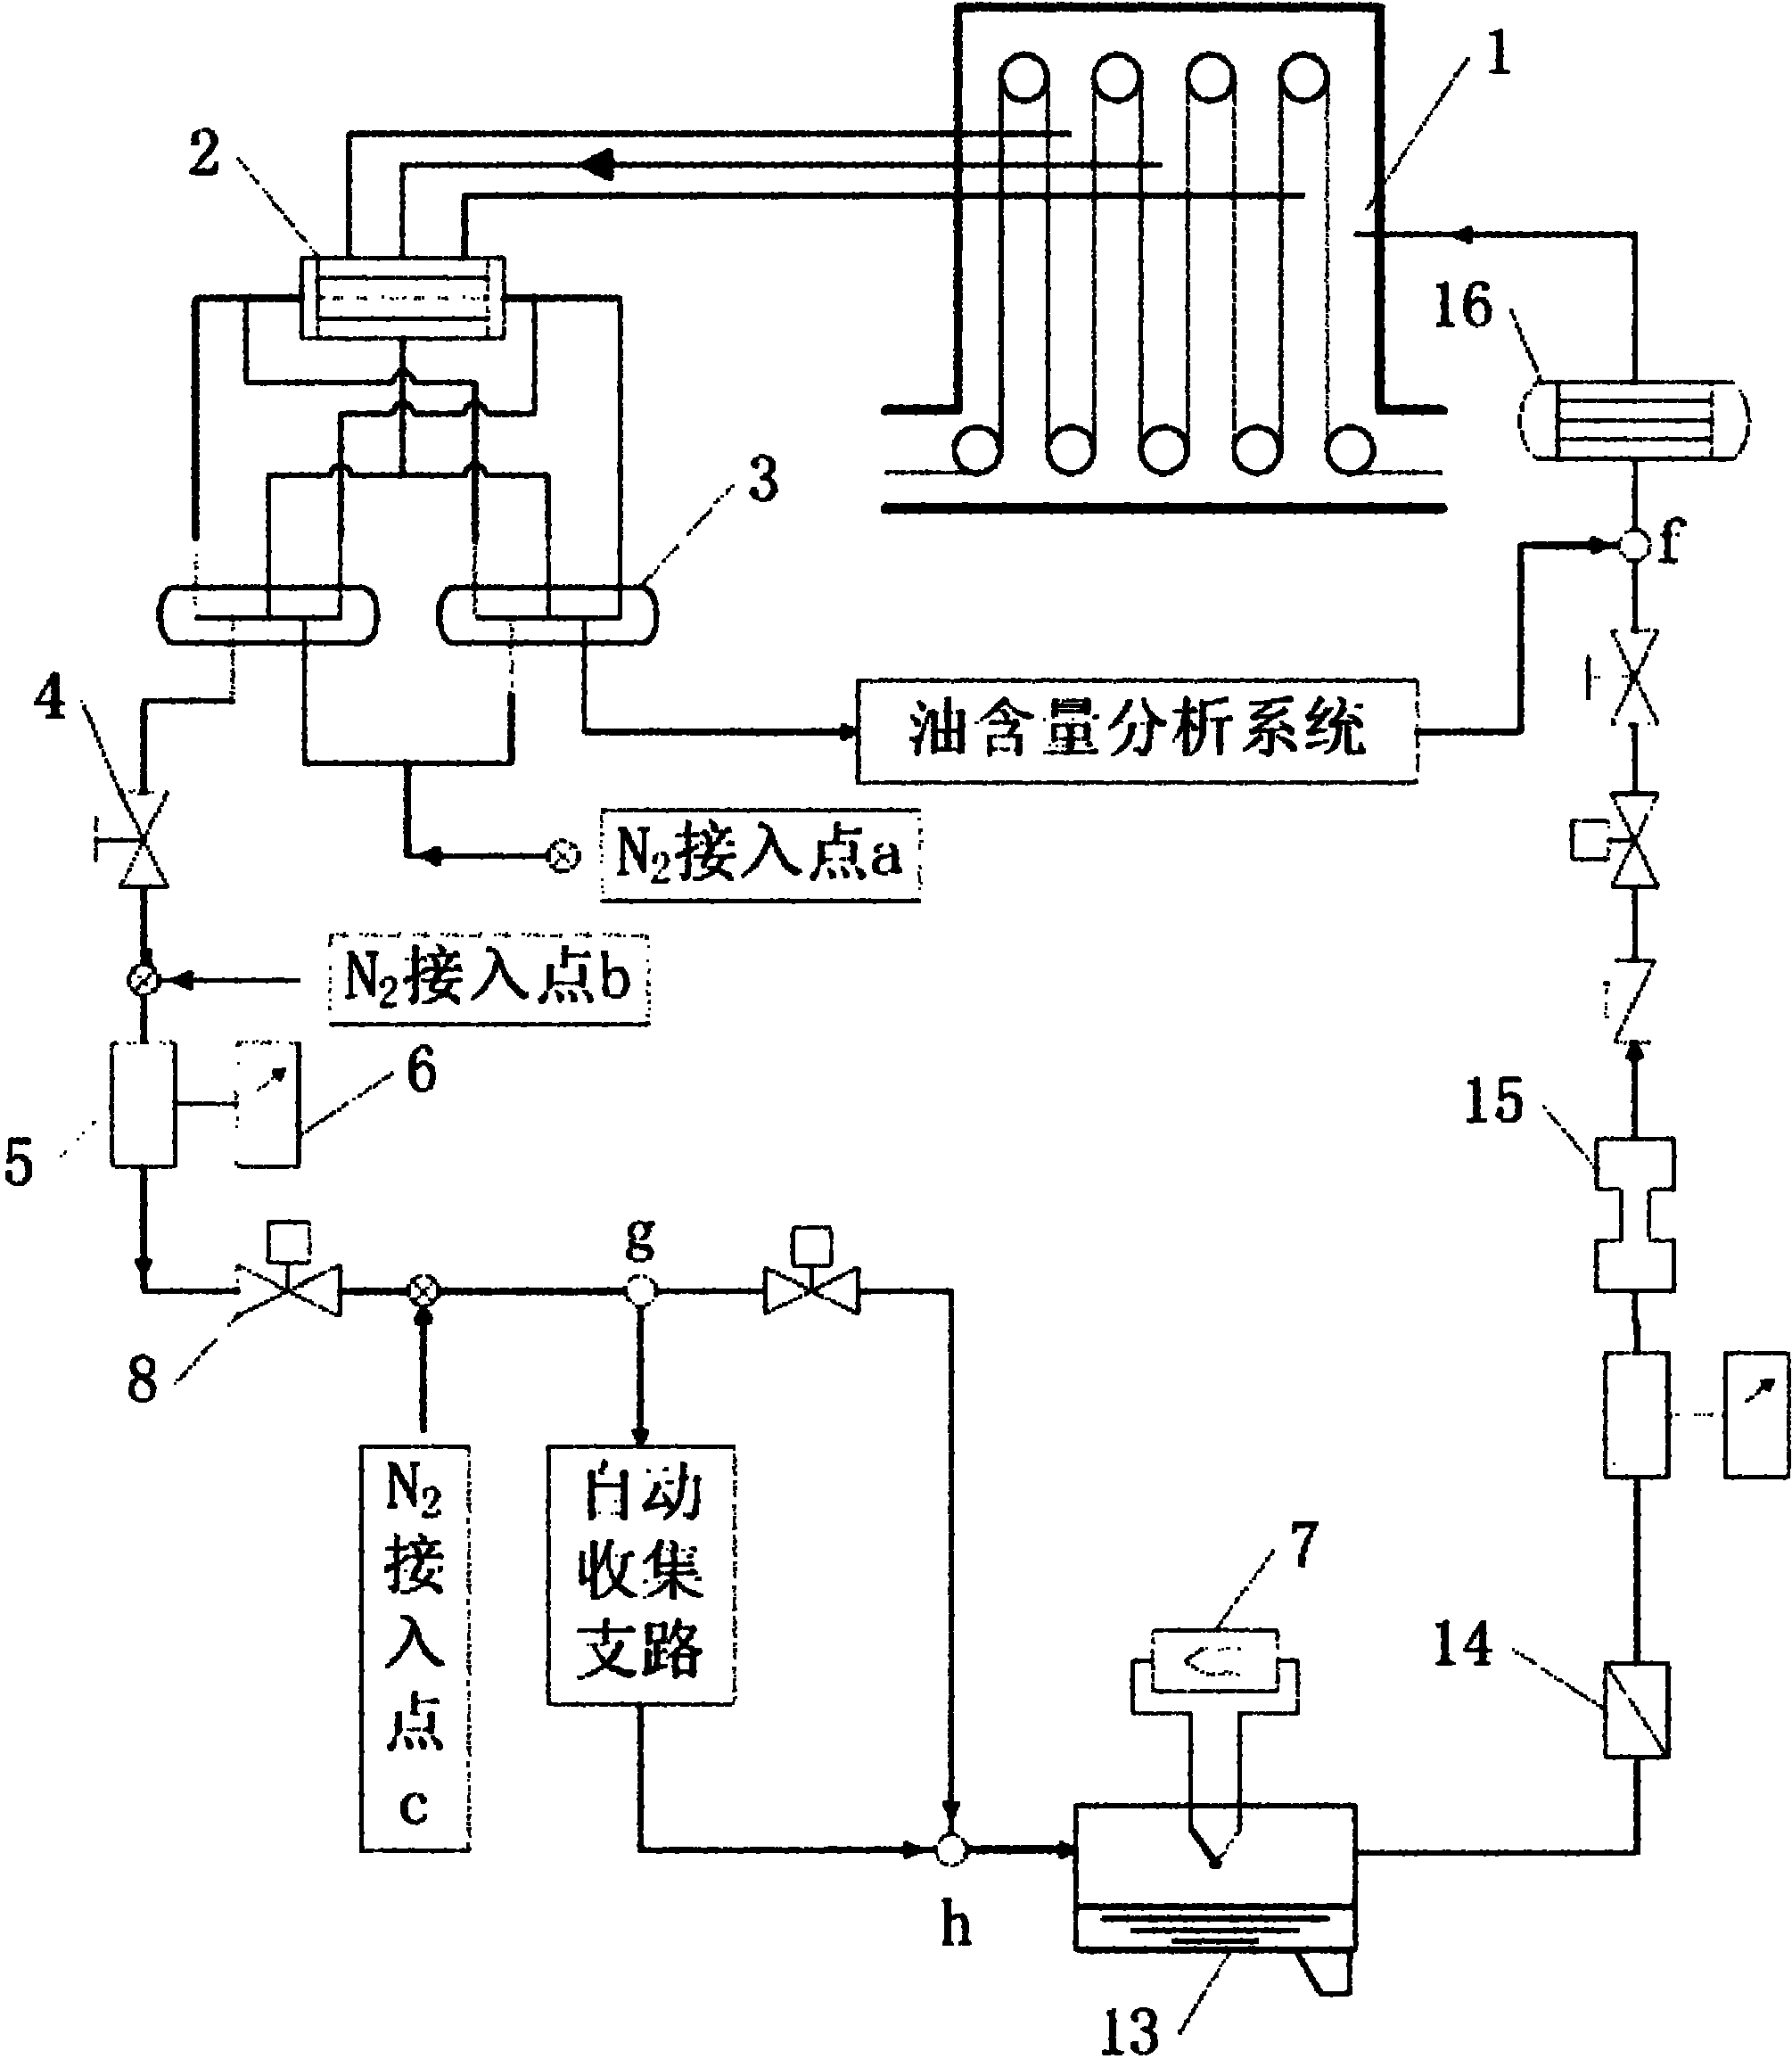 Detection system for detecting oil content in gas in continuous annealing furnace on line